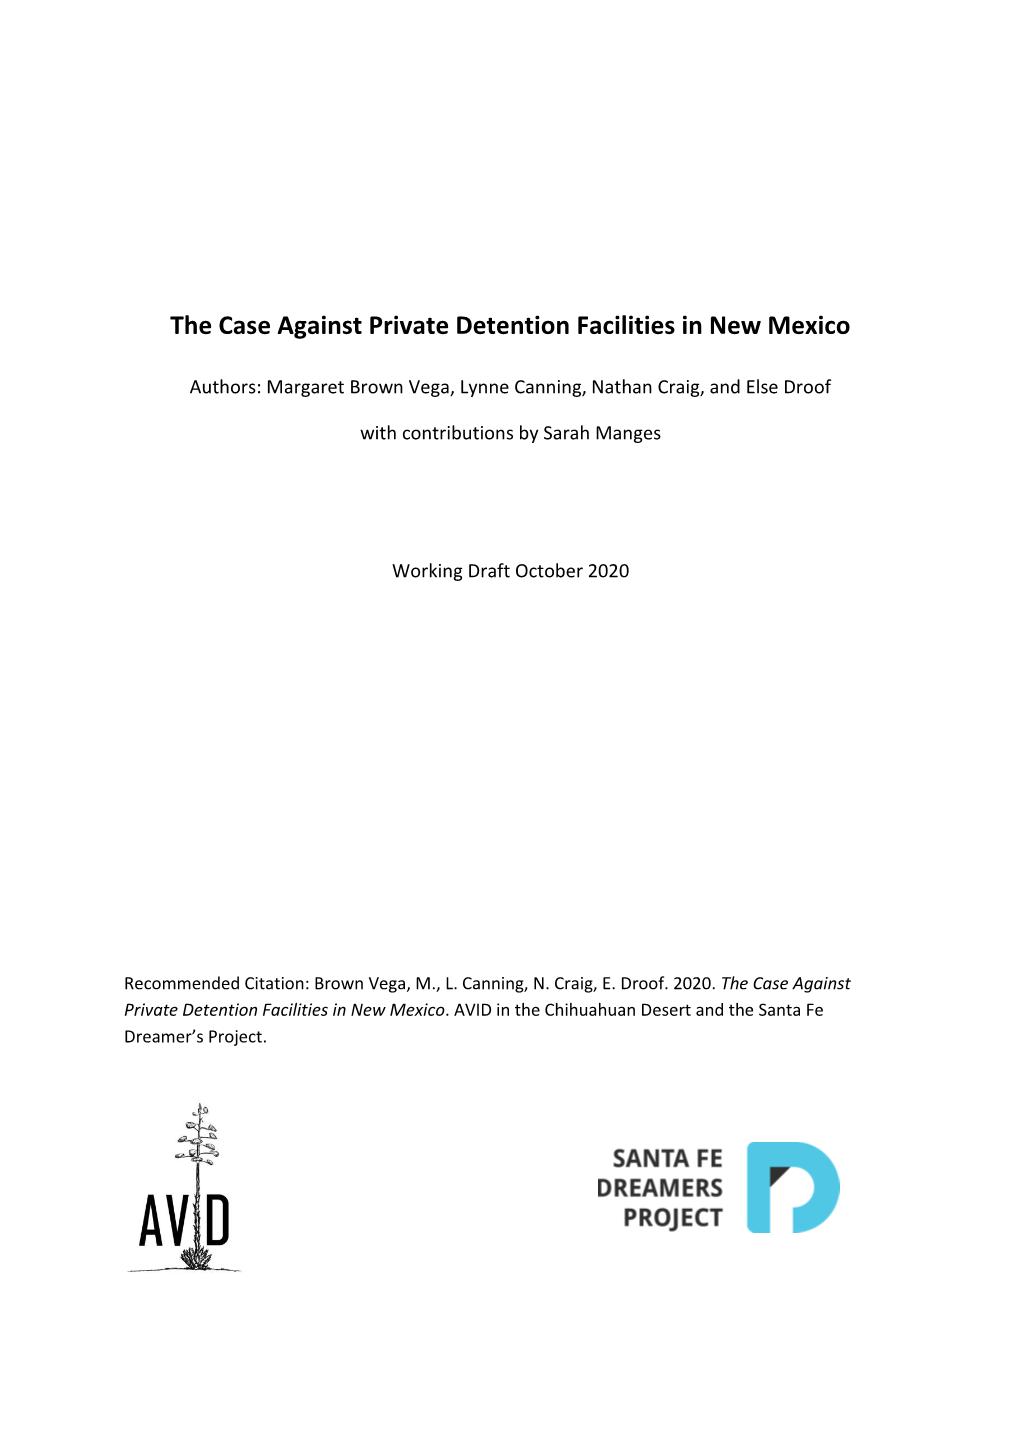 The Case Against Private Detention Facilities in New Mexico